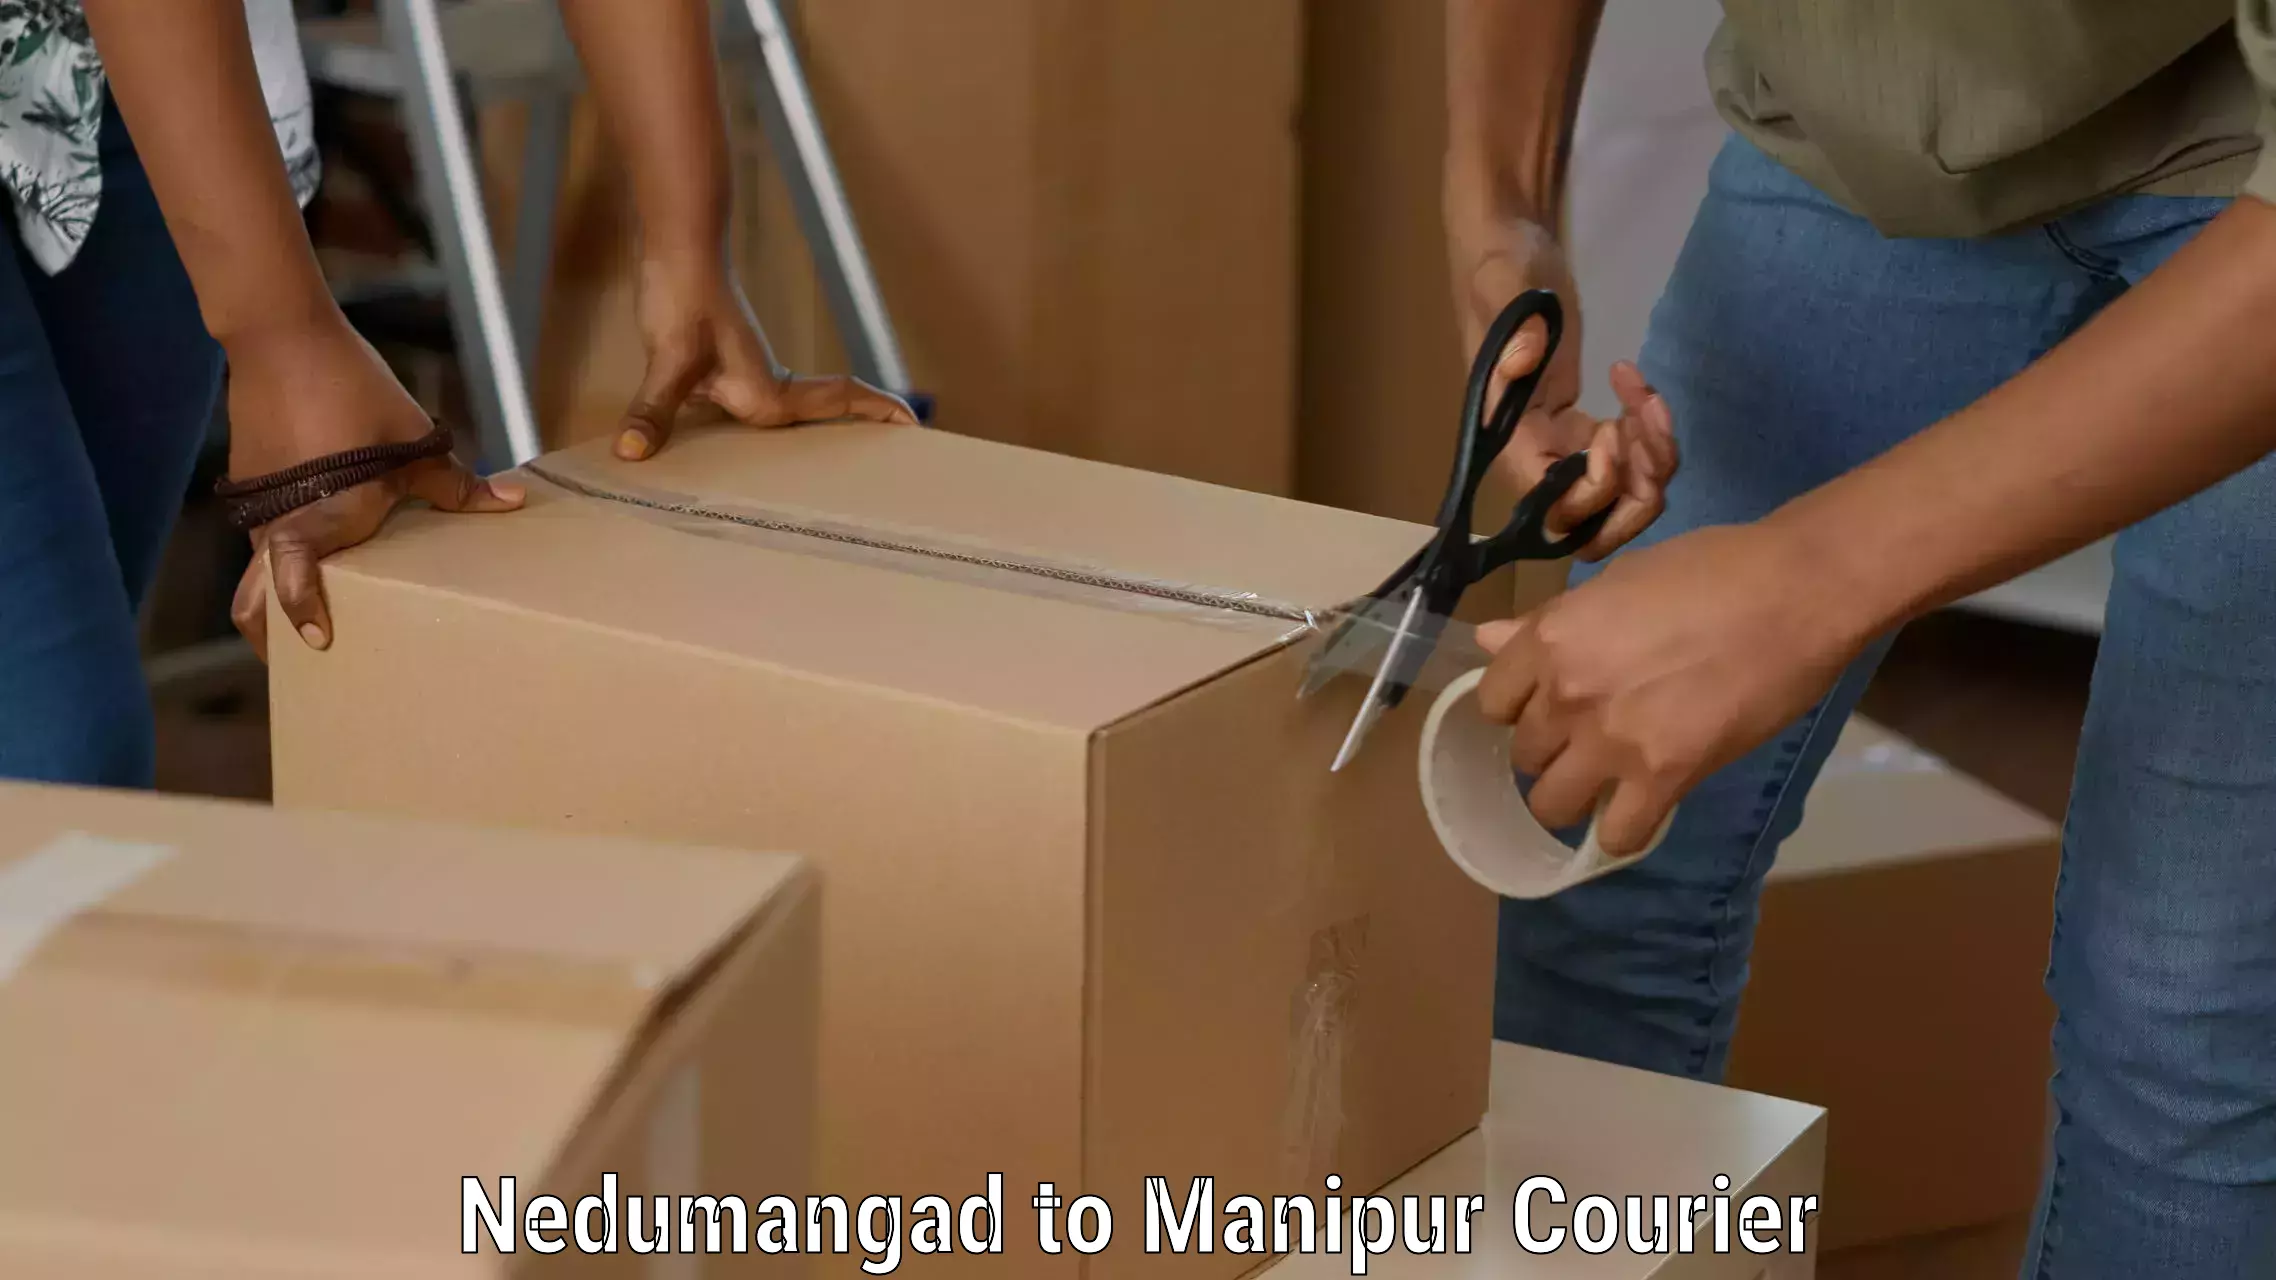 Nationwide shipping services Nedumangad to Manipur